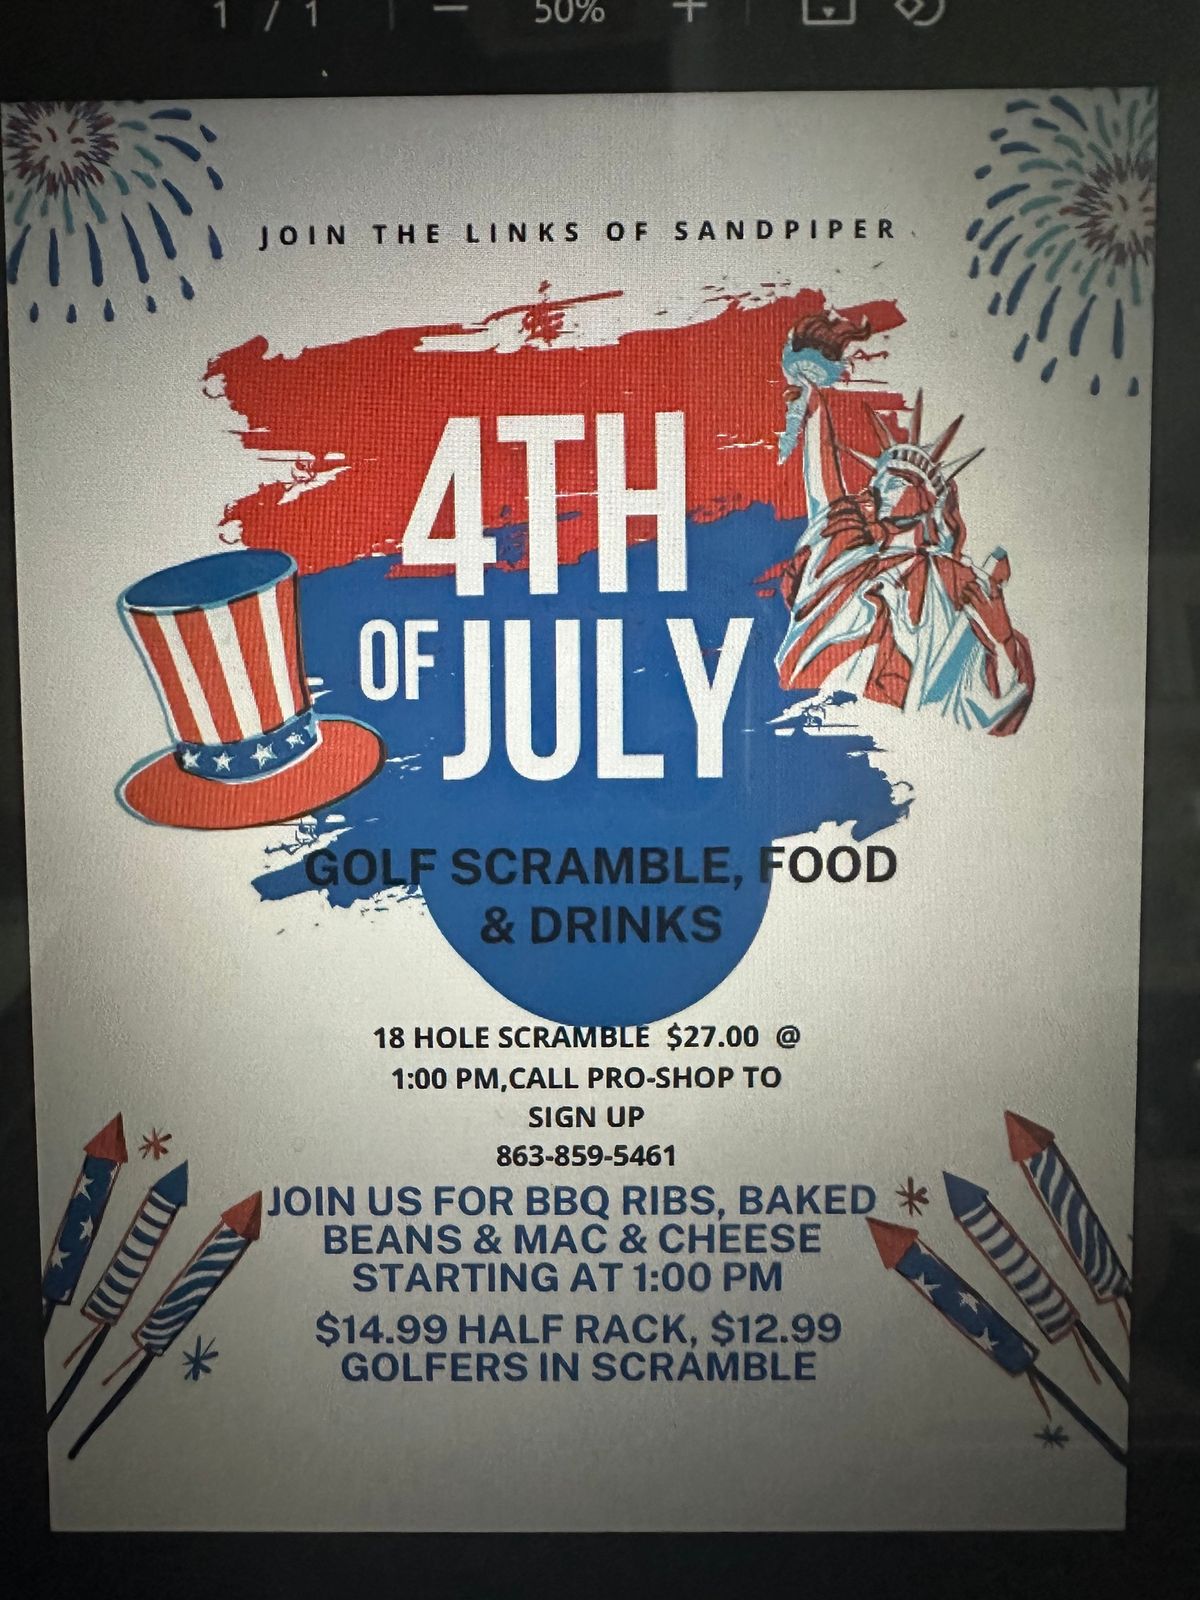 The Links' July 4th Celebration and Golf Scramble